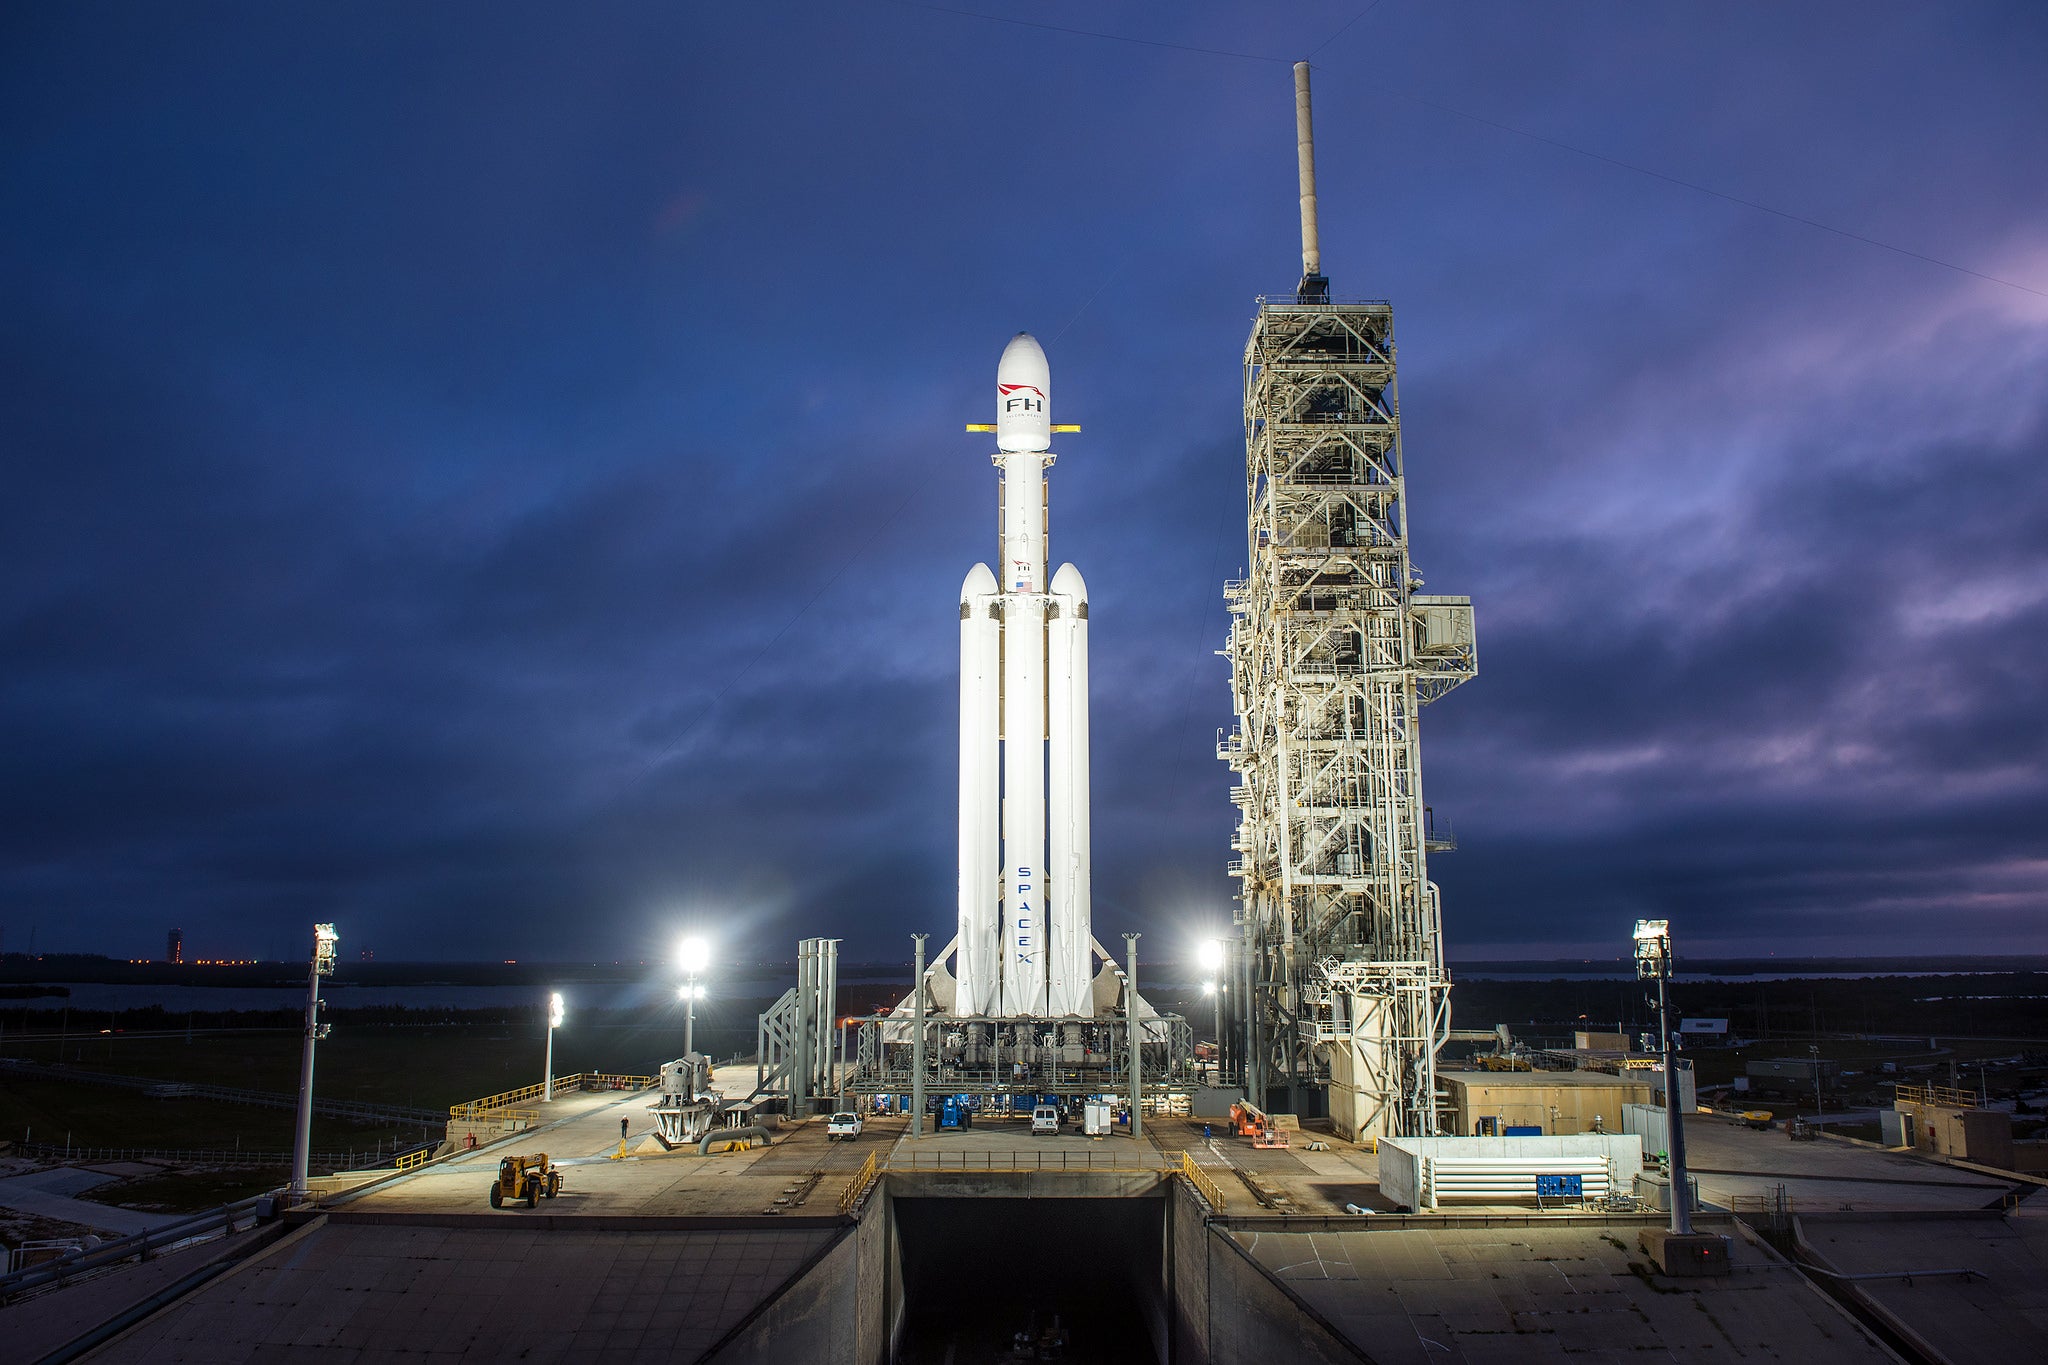 WATCH LIVE: SpaceX to launch Falcon Heavy rocket from Kennedy Space Center